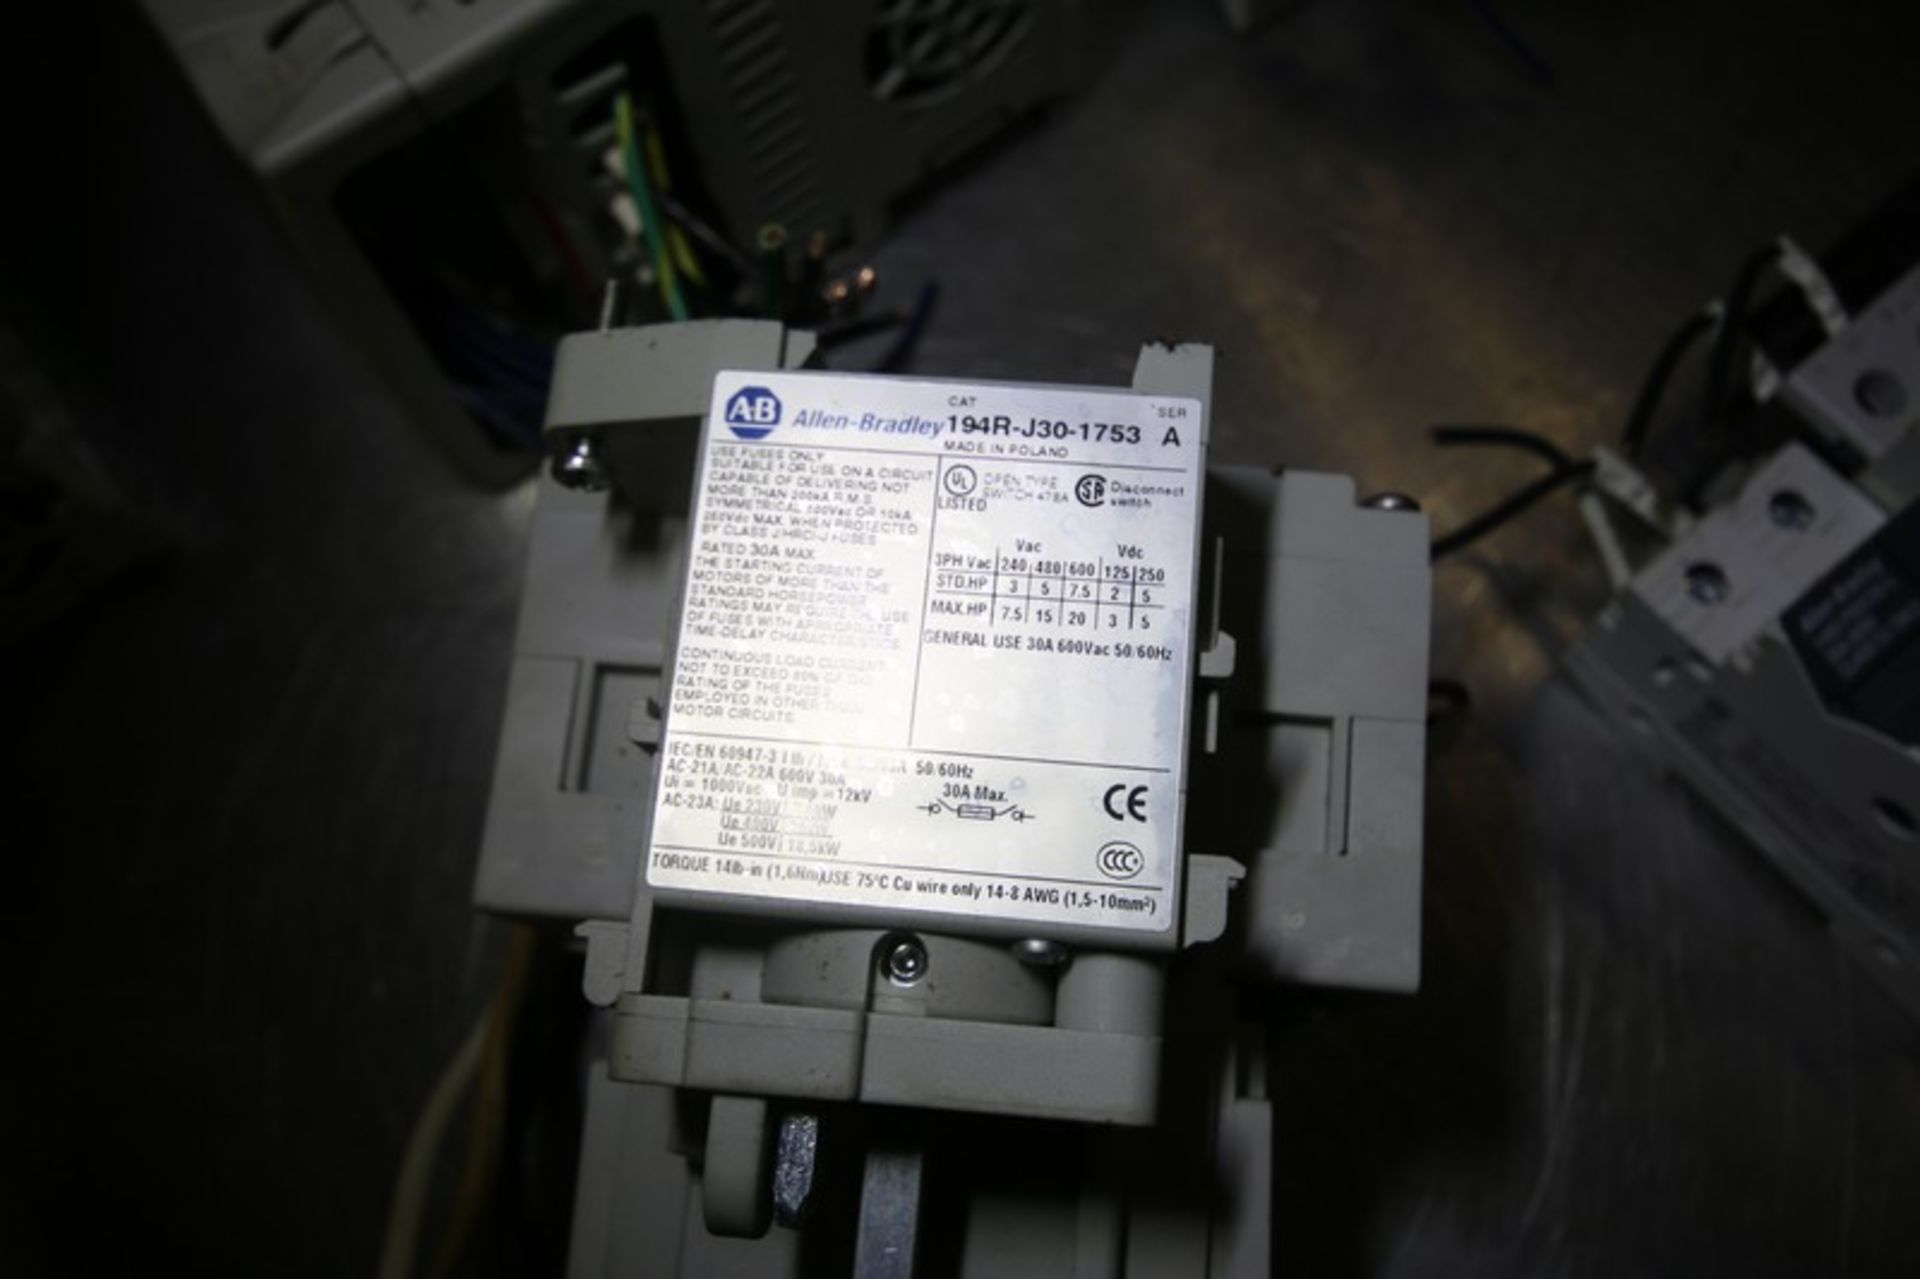 Production Control Panel Electrical Includes Allen Bradley Micrologix 1000 PLC Controller - Cat. No. - Image 9 of 11